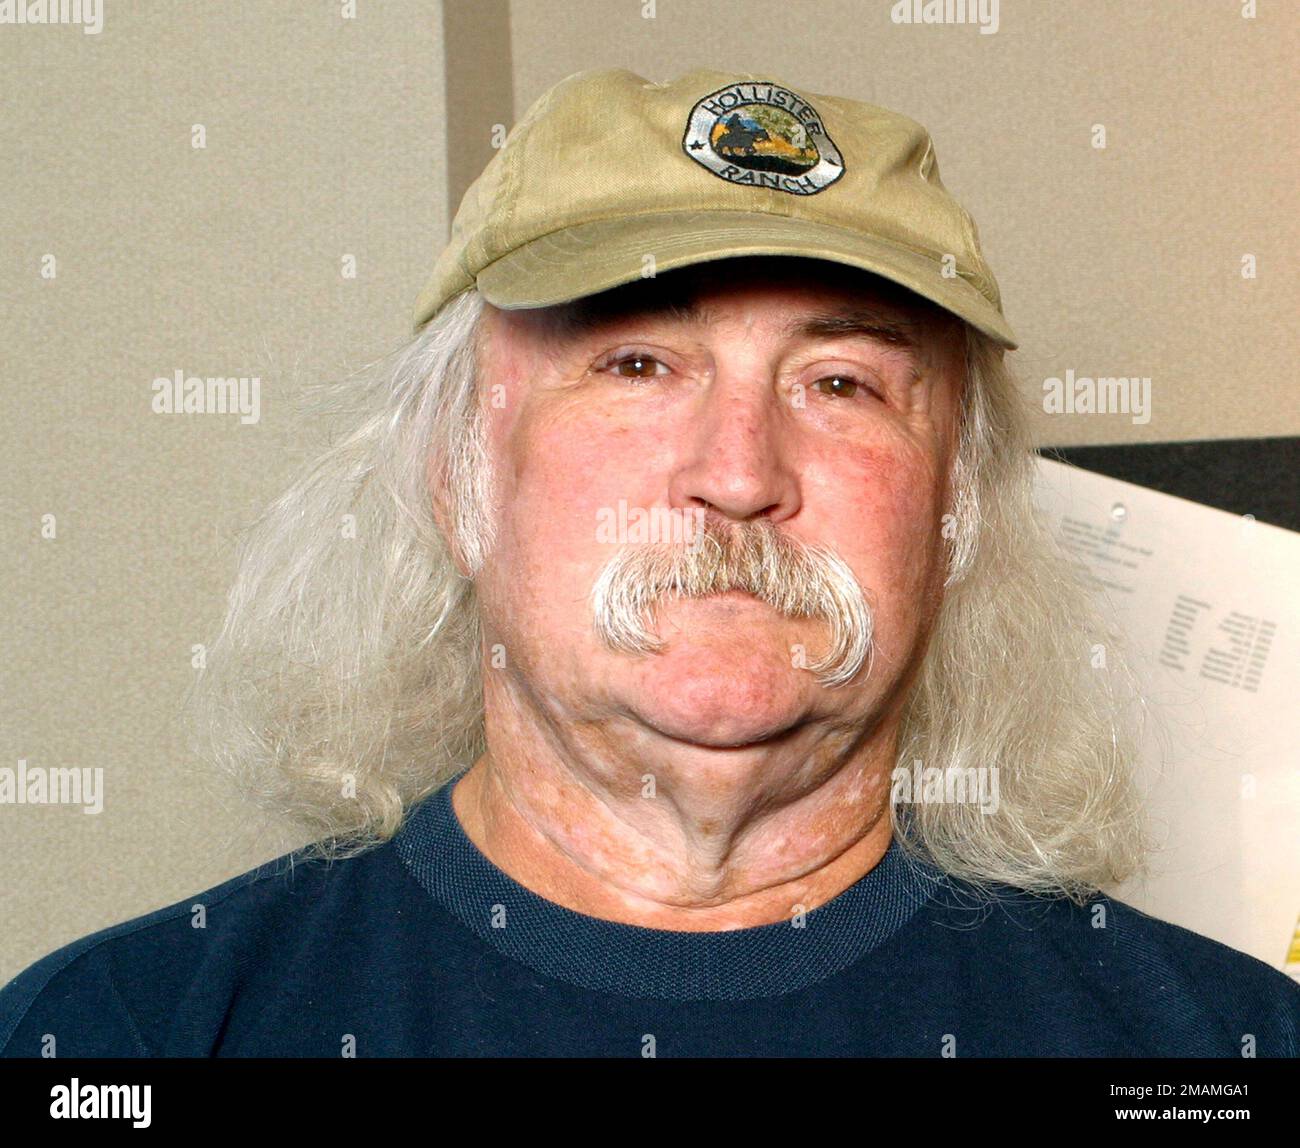 **FILE PHOTO** David Crosby Has Passed Away. David Crosby photographed in Philadelphia, PA. March 6, 2003. Credit: Scott Weiner/MediaPunch Stock Photo